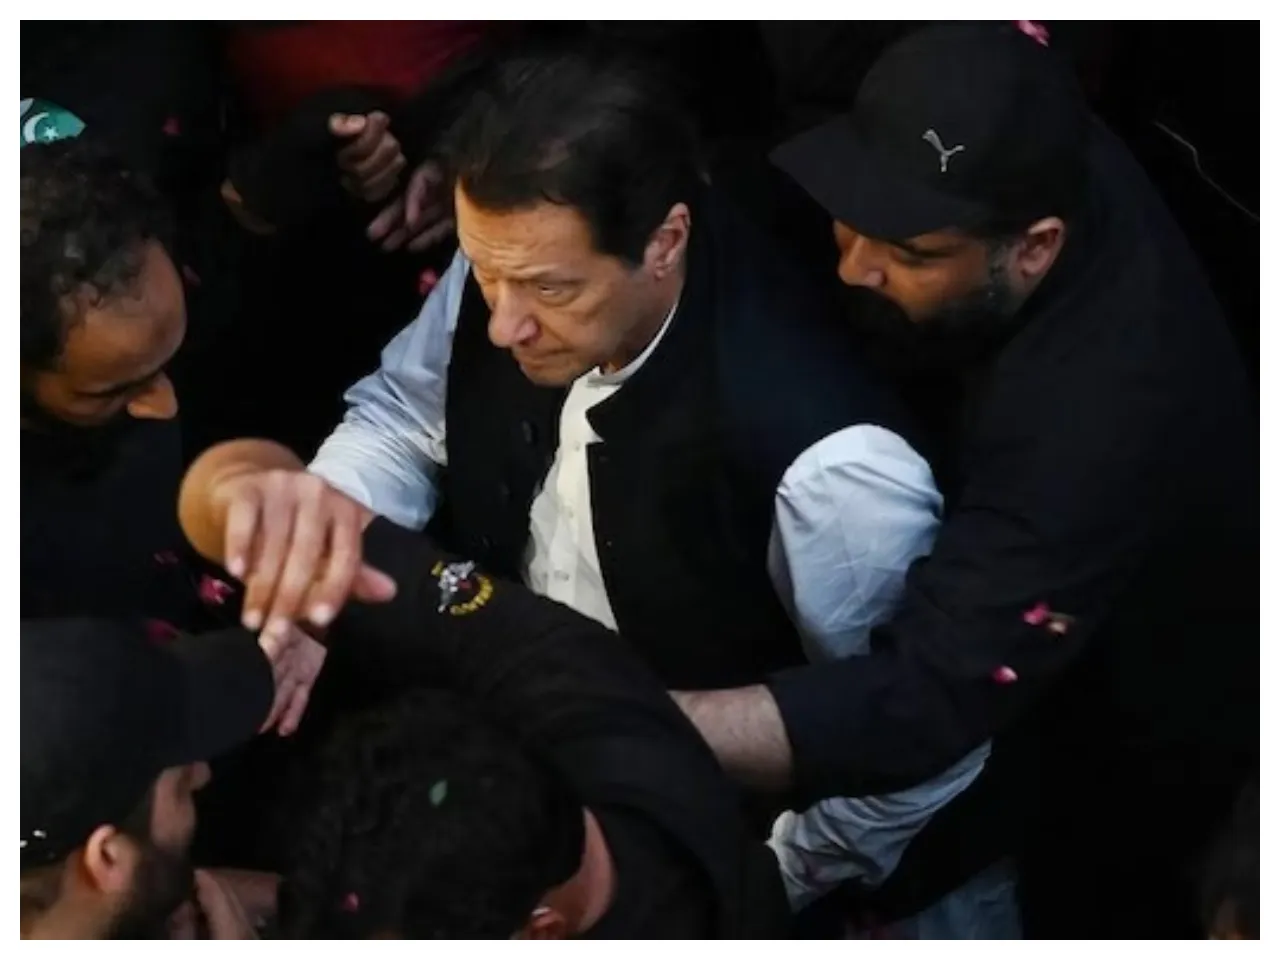 Imran's police drugs and drags him like a condemned prisoner